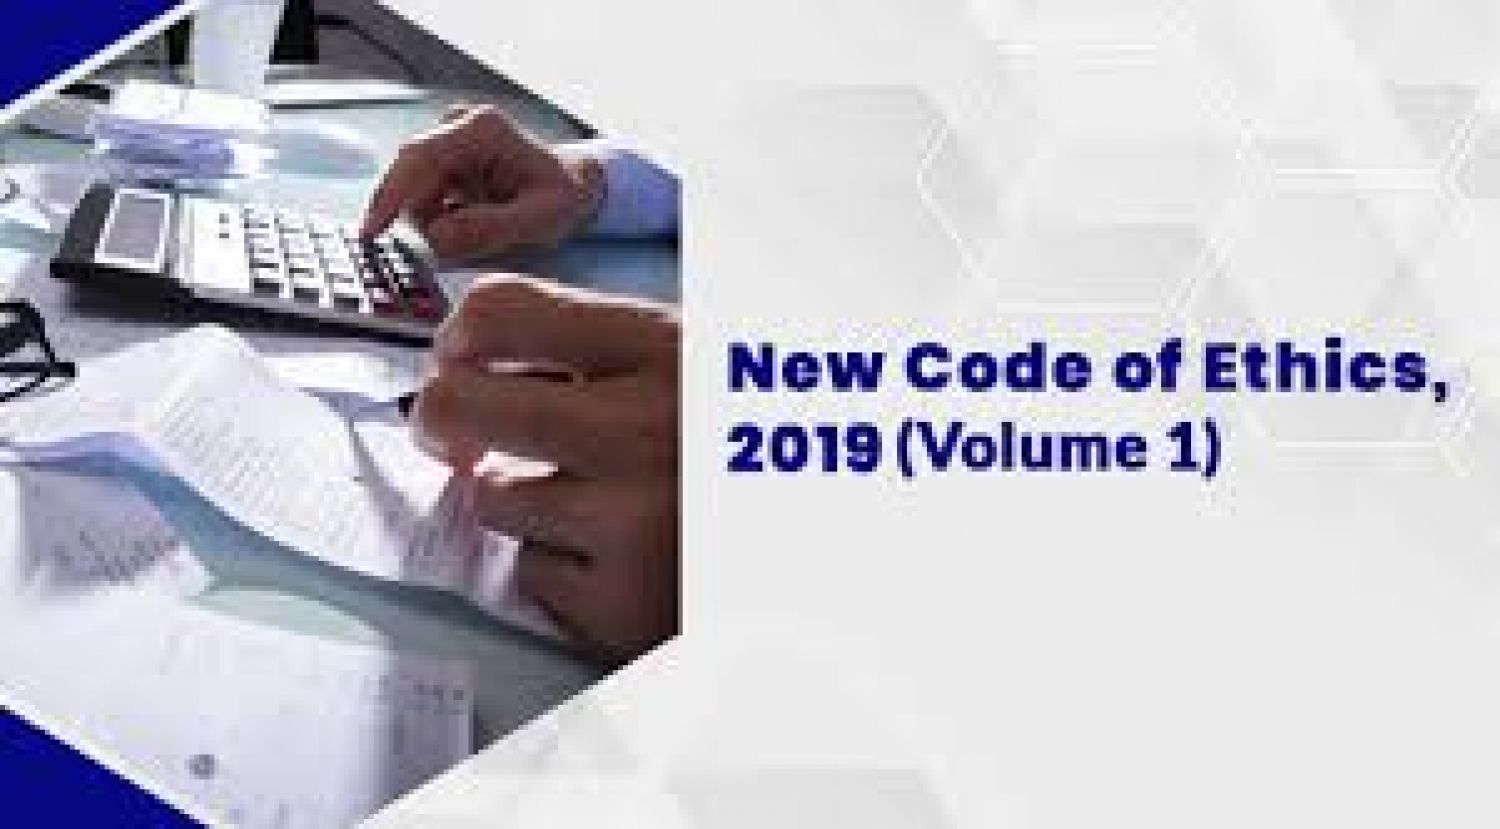 Major Changes in the New Code of Ethics 2019